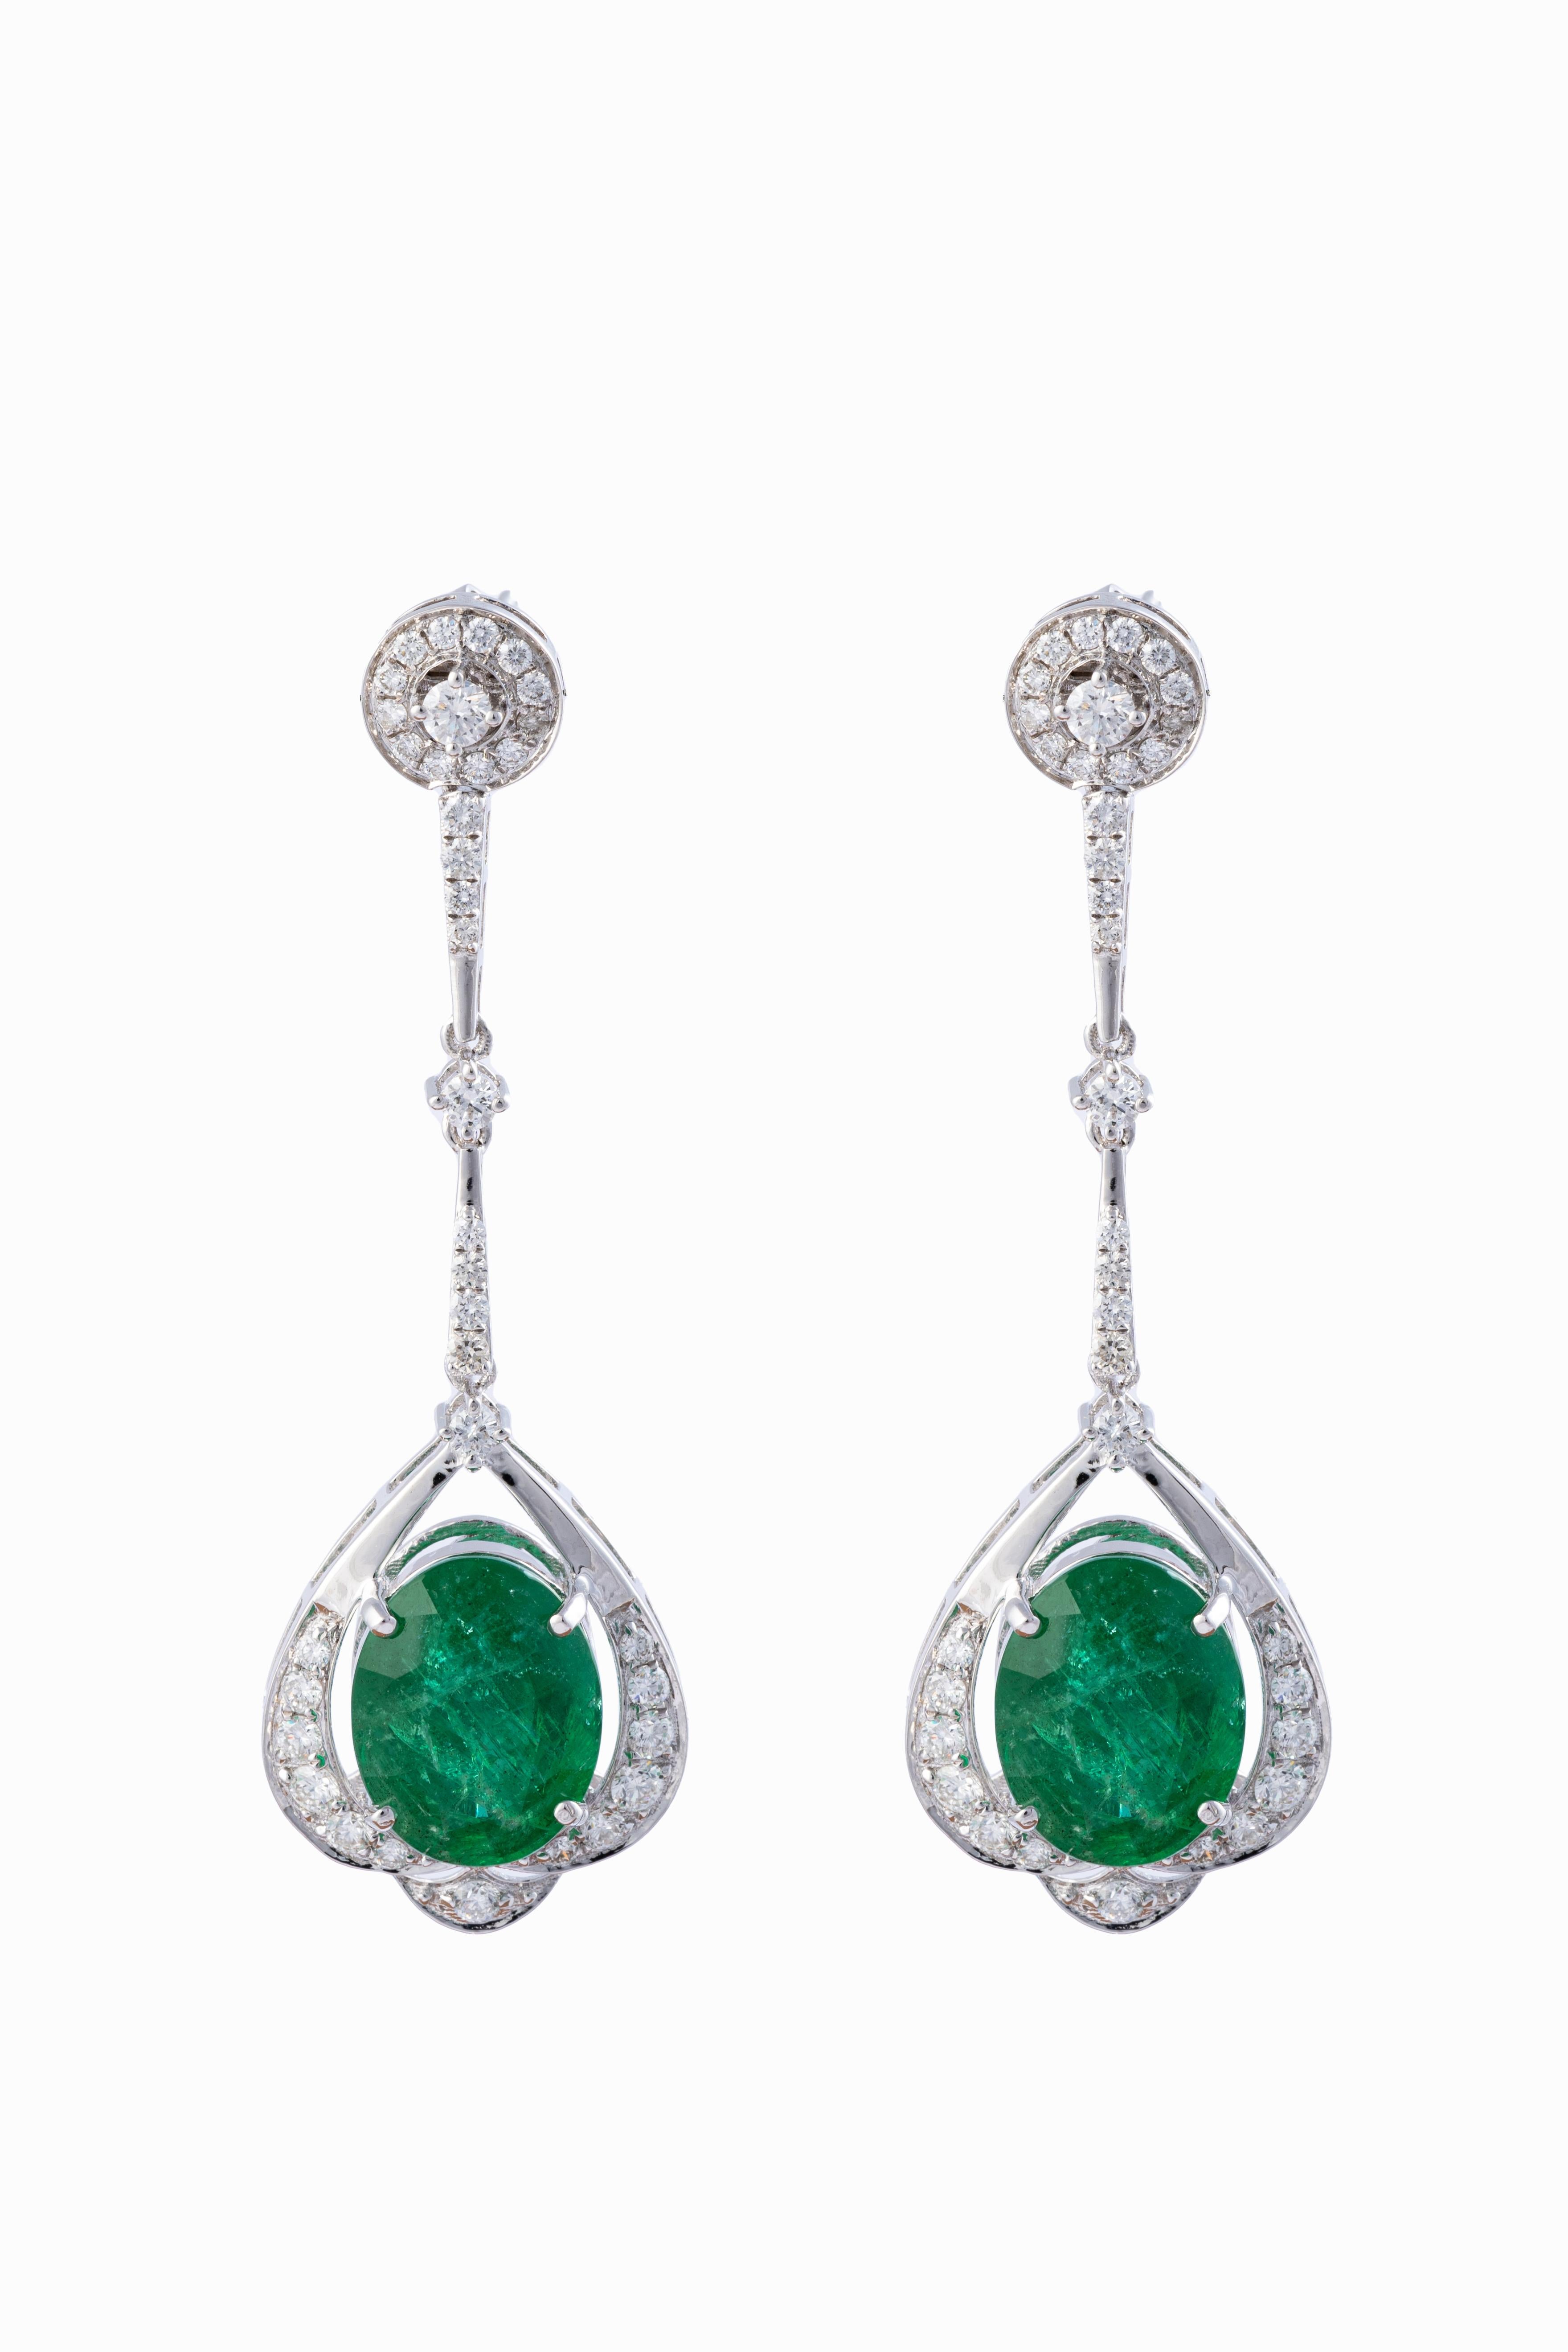 Emerald Cut 10.18cts  Zambian Emerald Earrings with 1.43cts Diamonds and 14k Gold For Sale